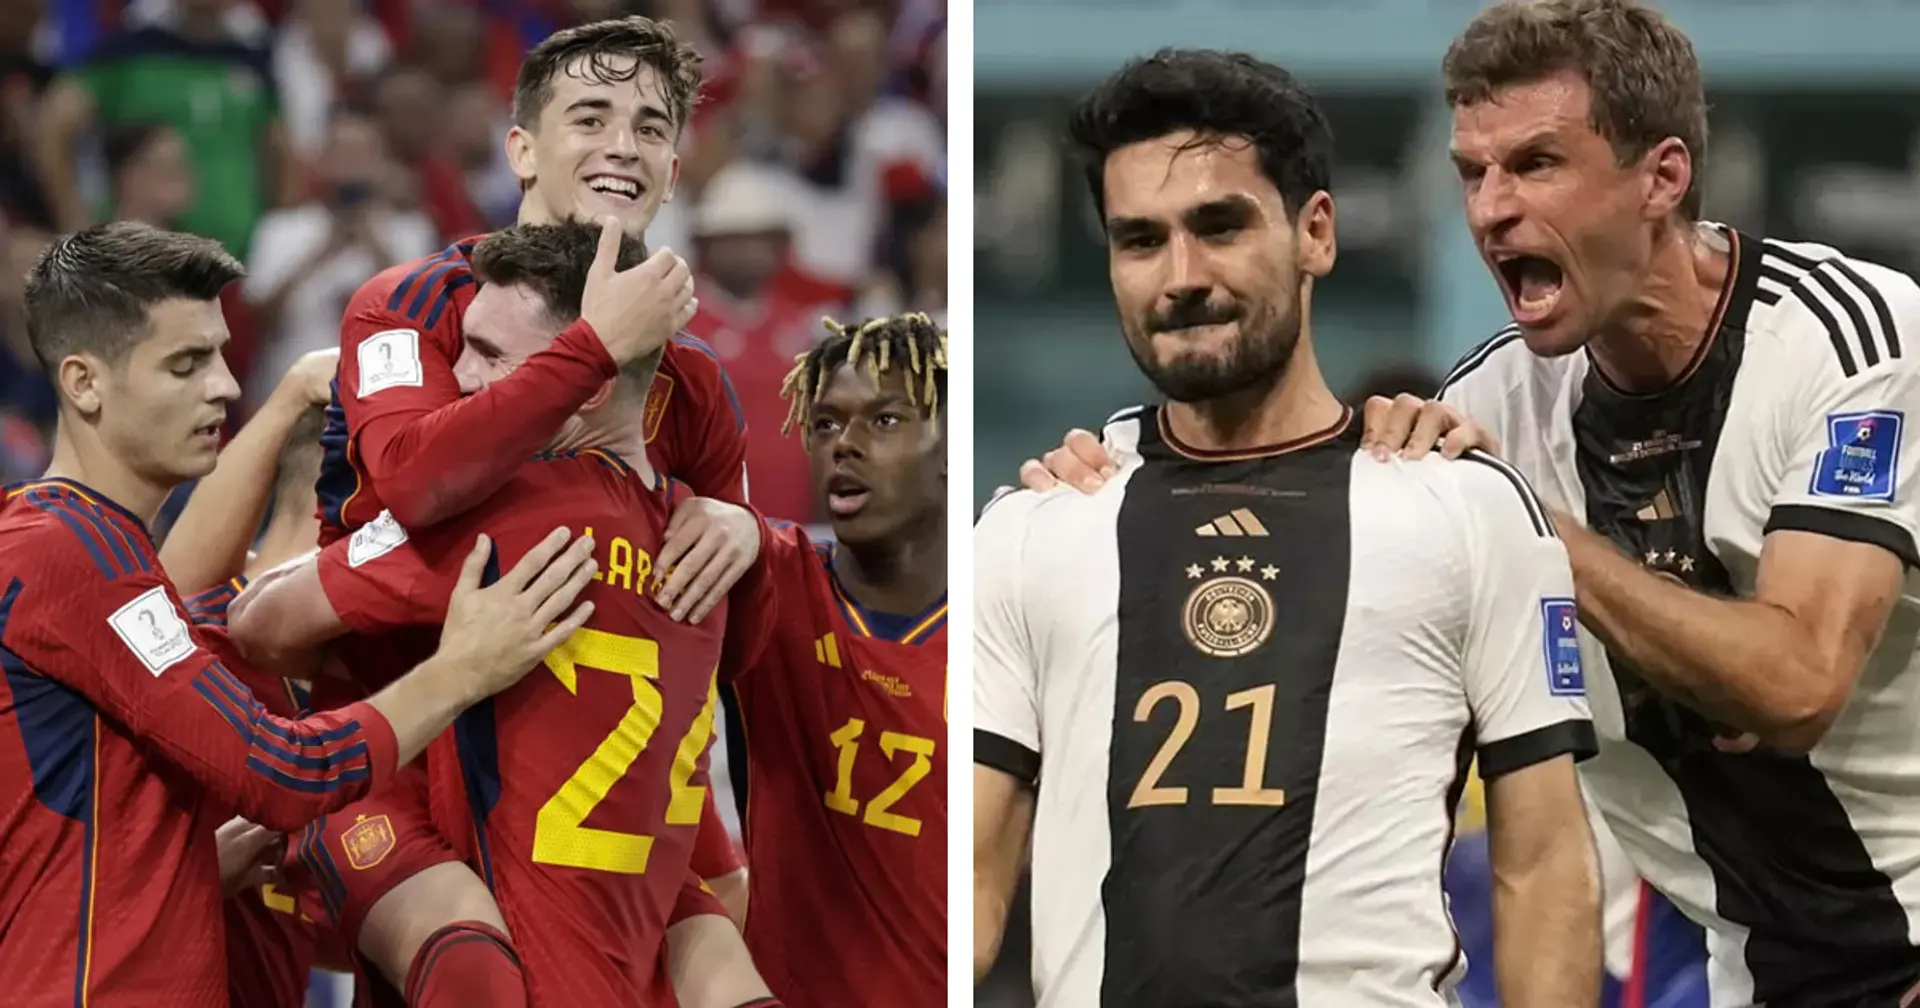 Spain vs Germany: Official team lineups for the World Cup clash revealed